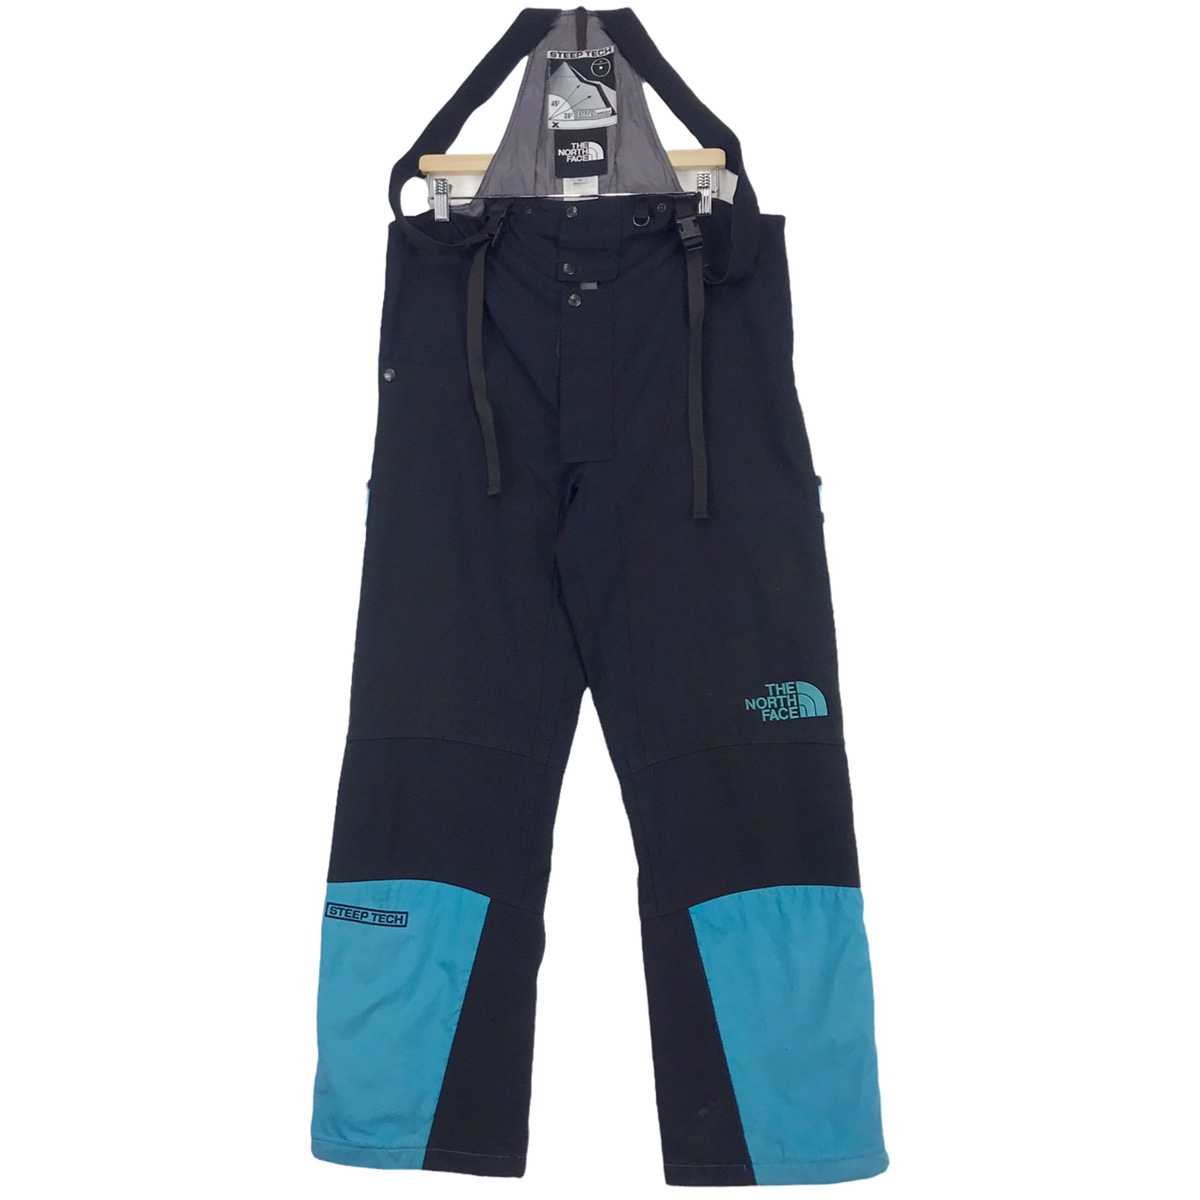 Outdoor Style Go Out! - Vintage The North Face Steep Tech Jumpsuits Ski Pants - 1